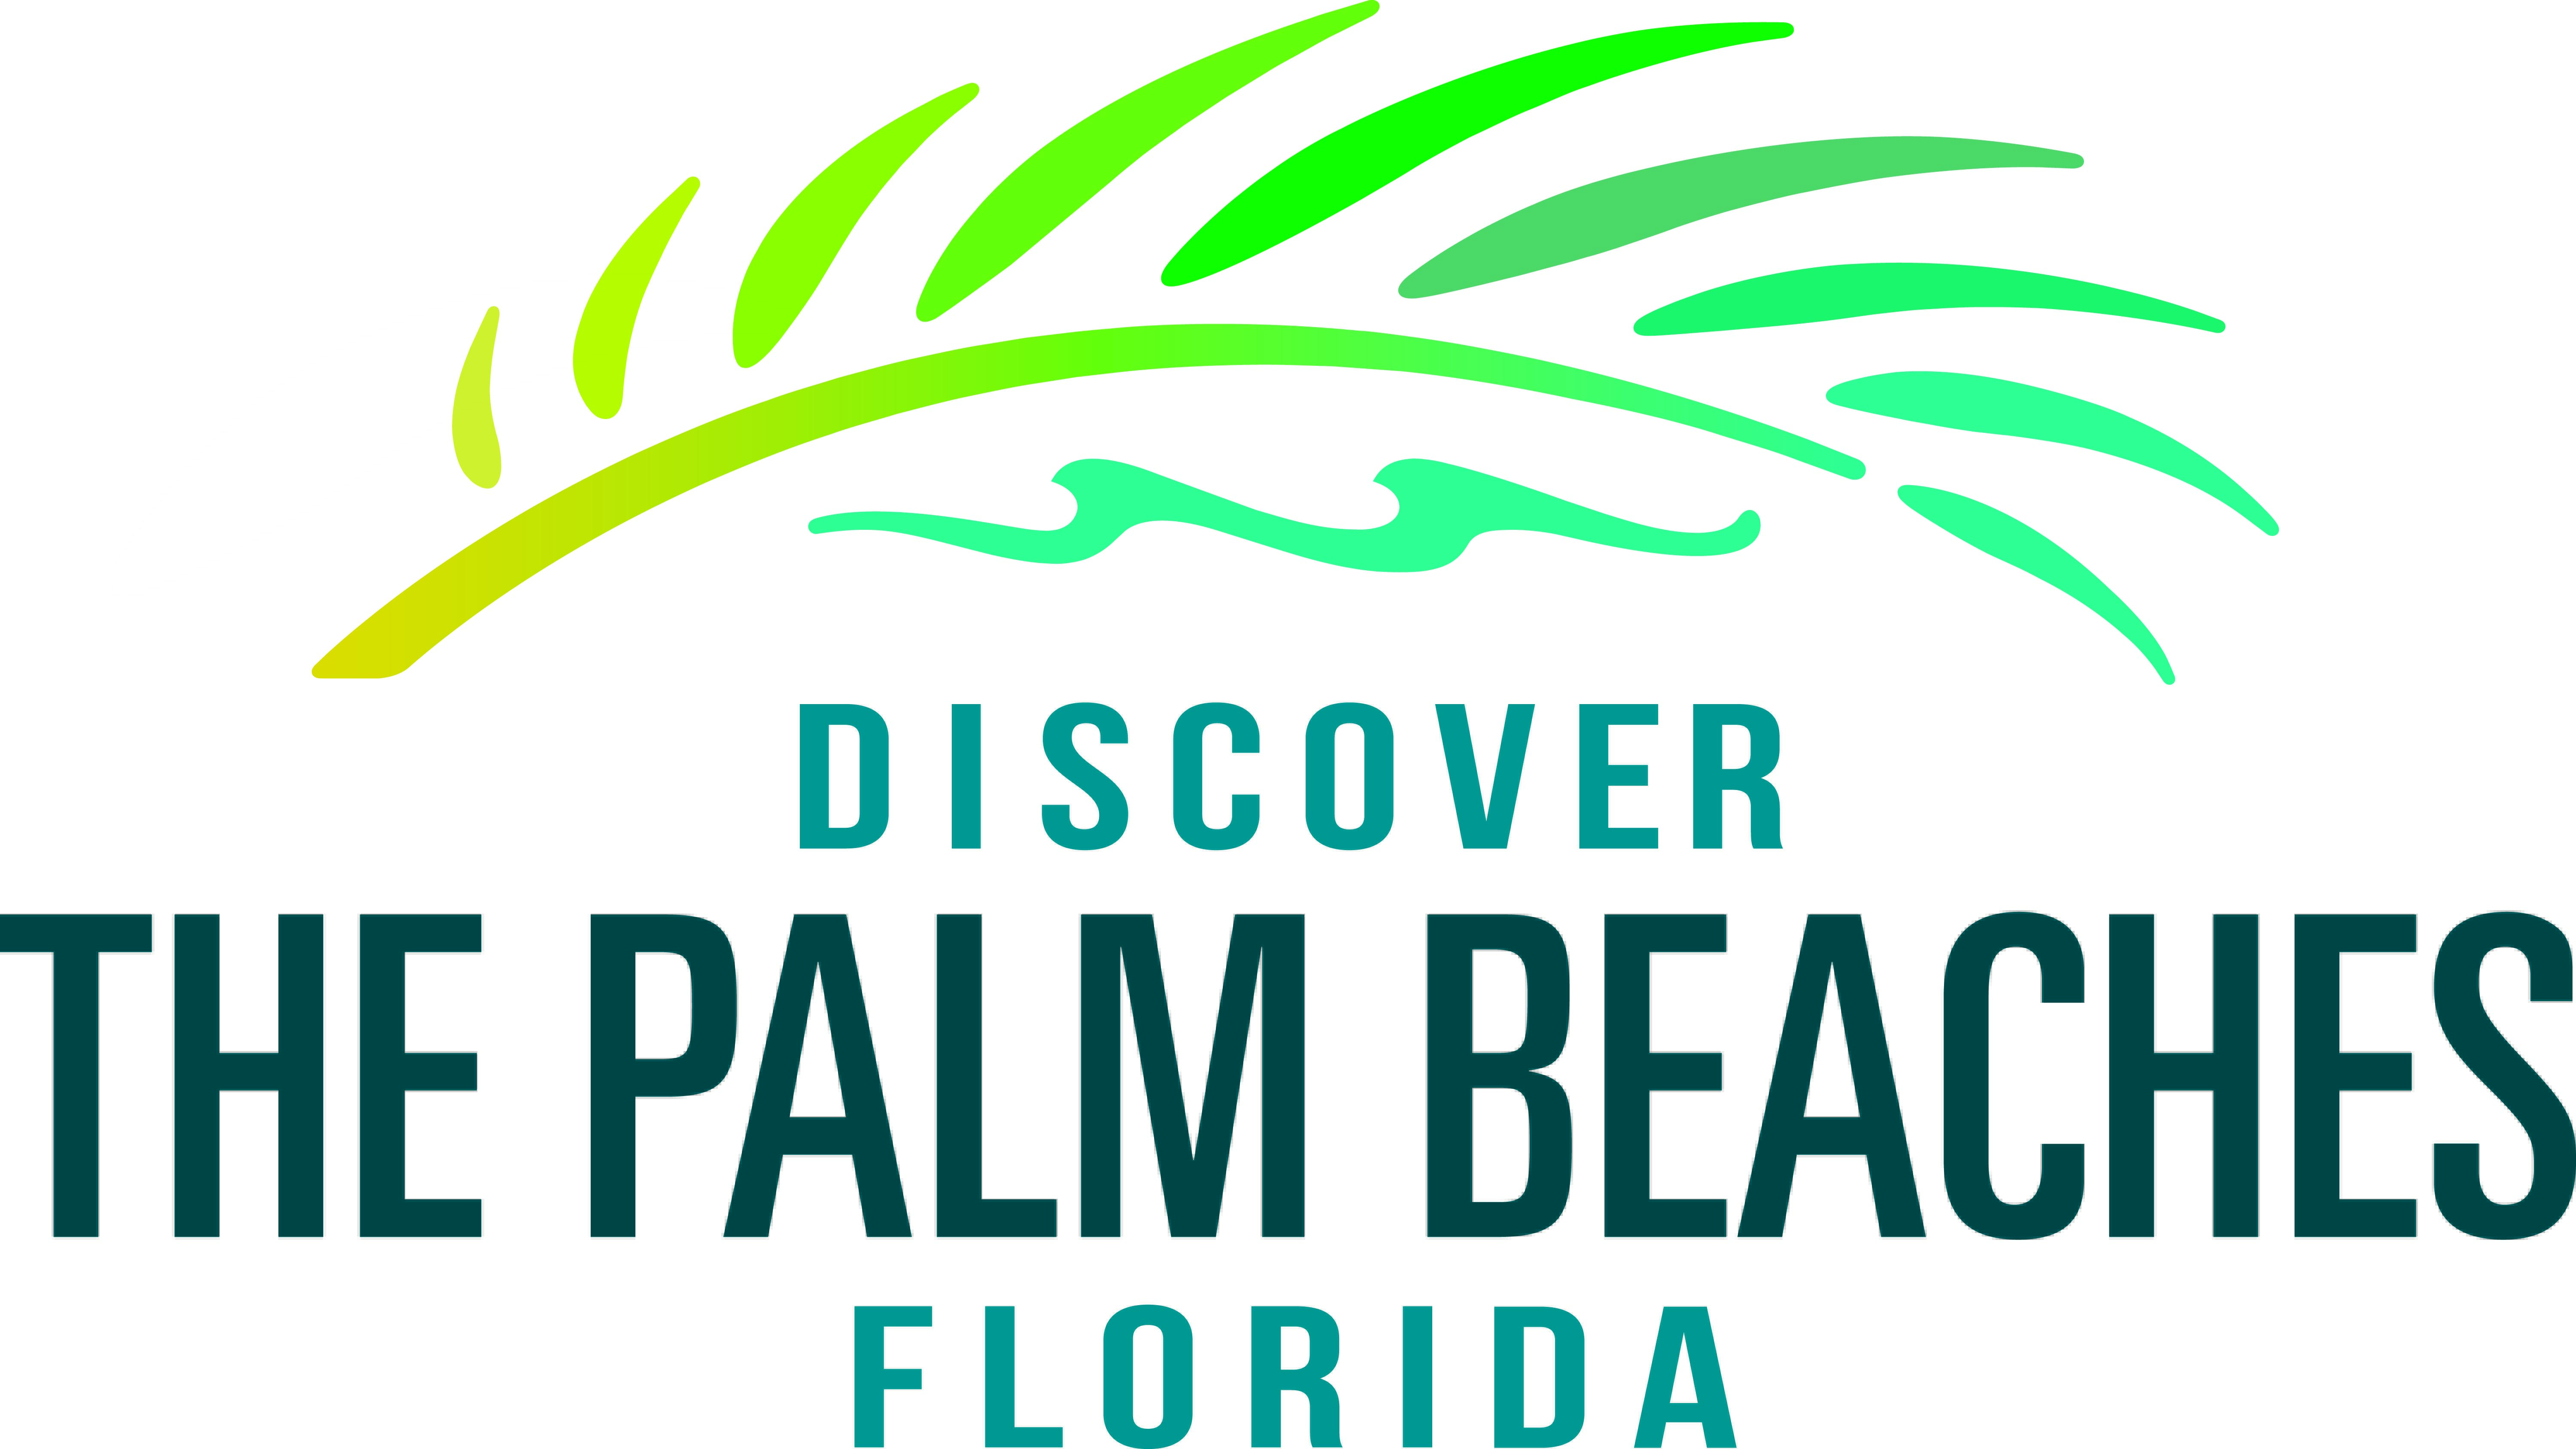 DISCOVER THE PALM BE